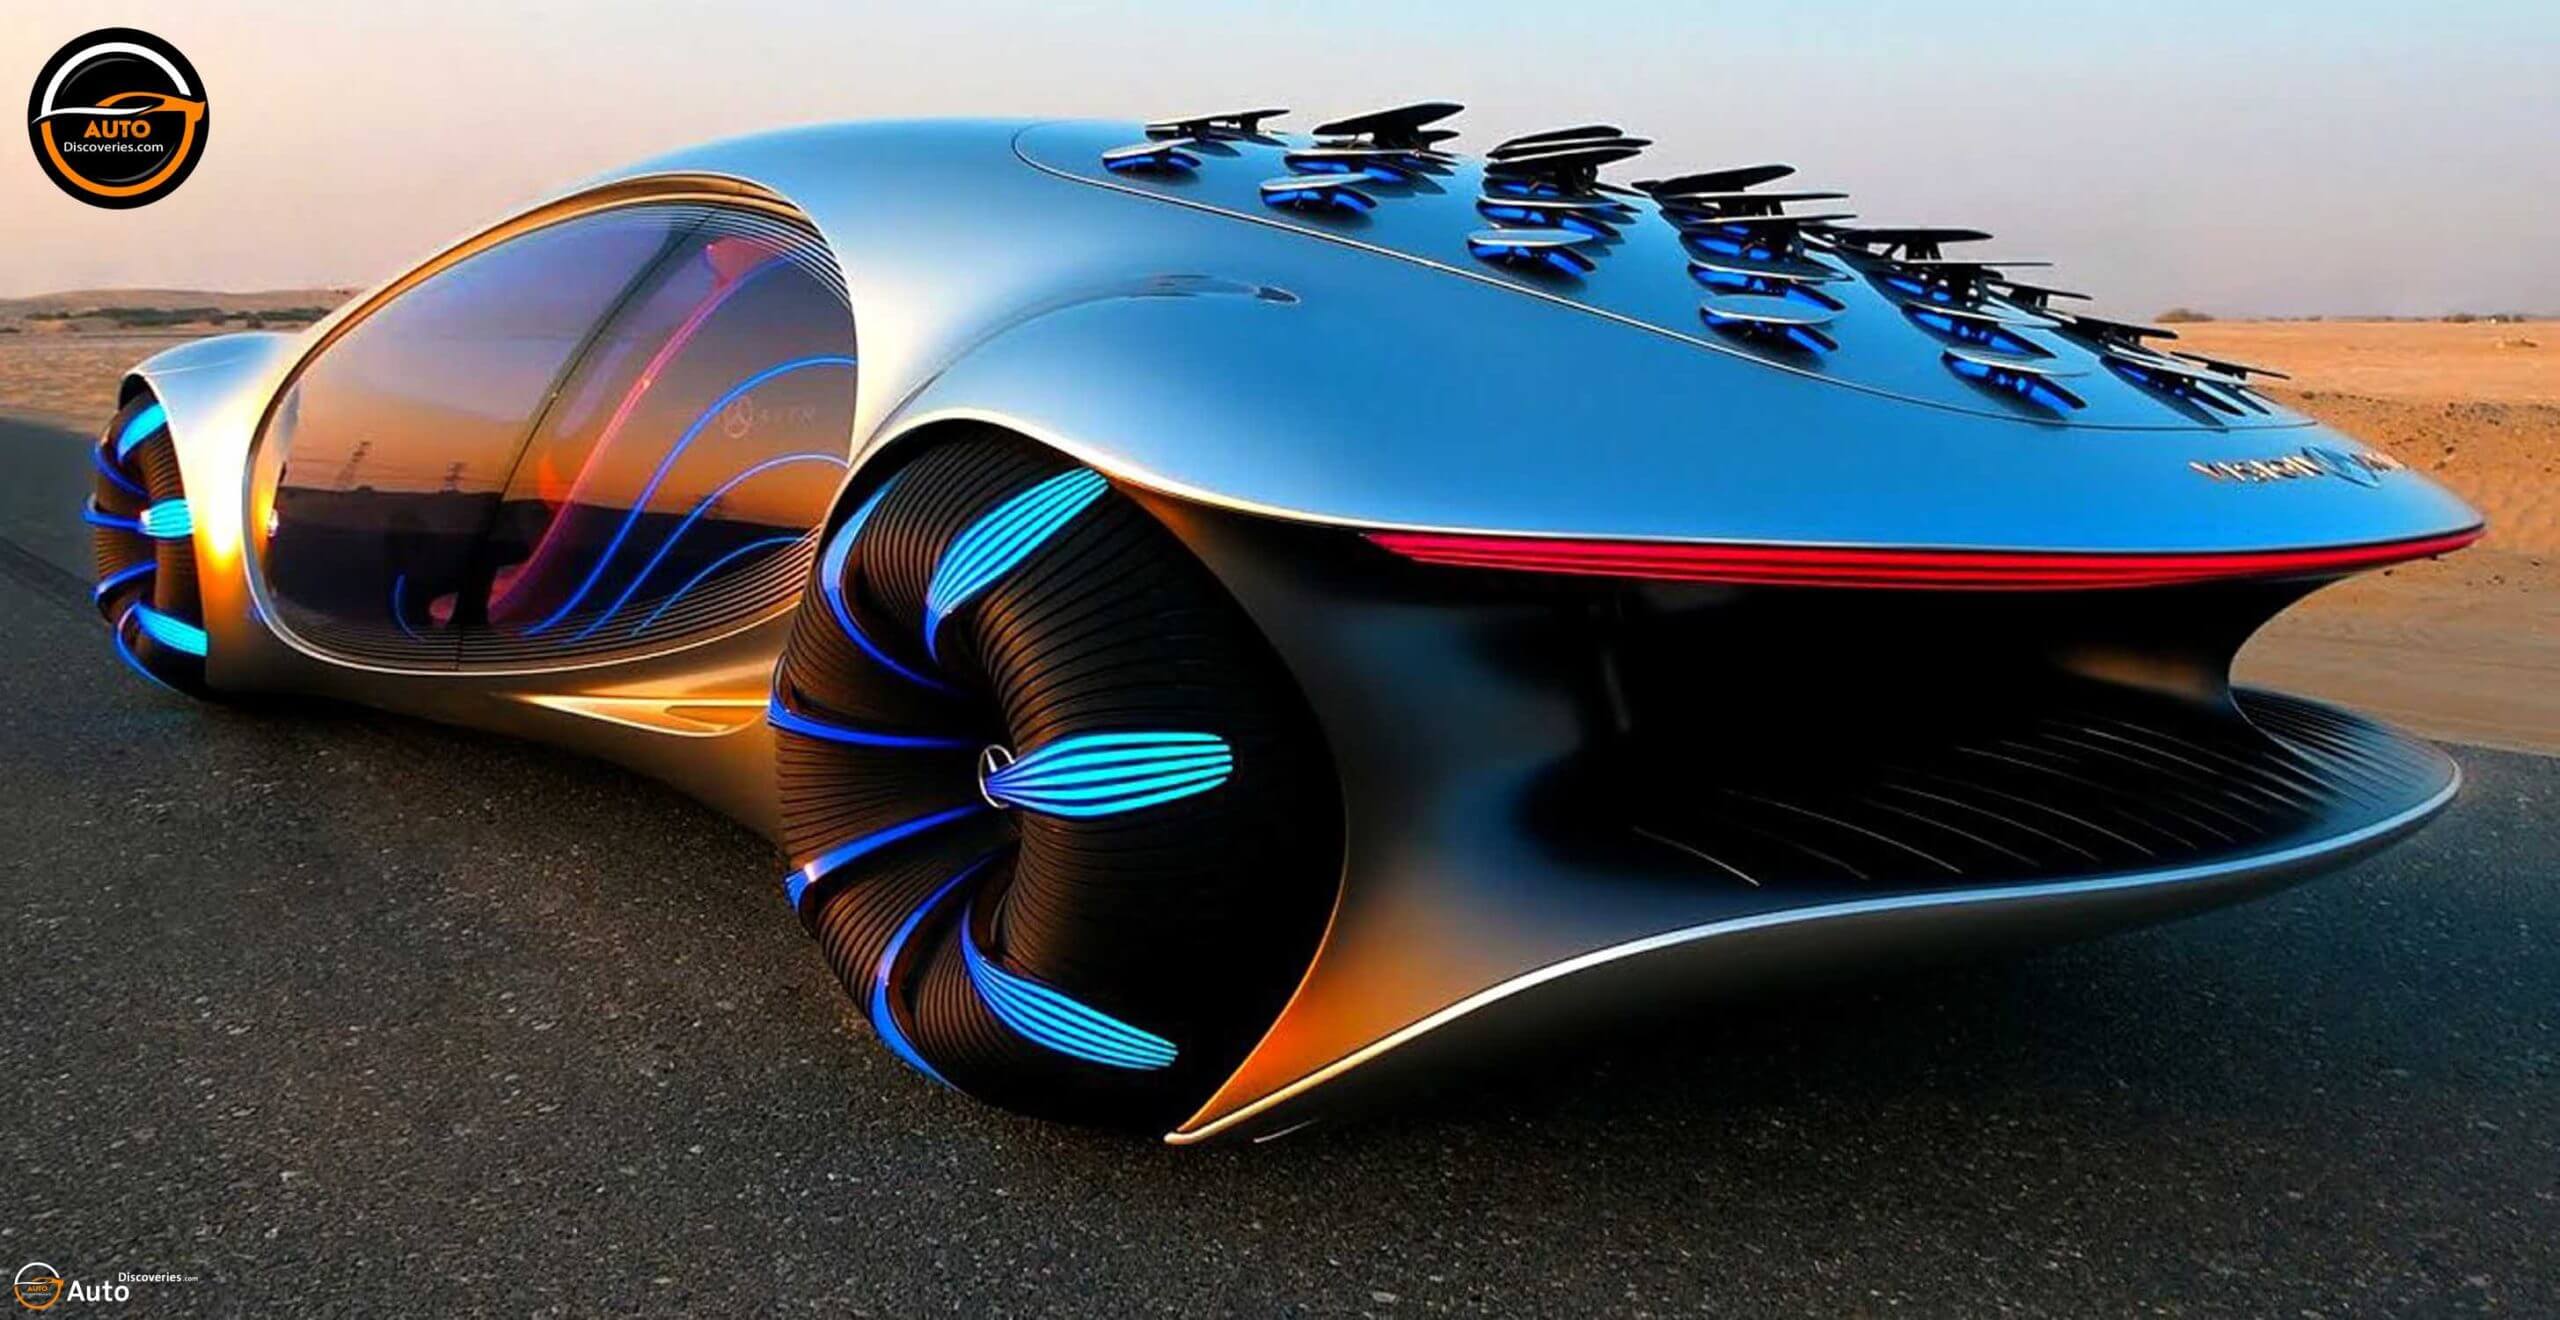 MercedesBenz Vision AVTR, The Most Futuristic Car From MB Auto